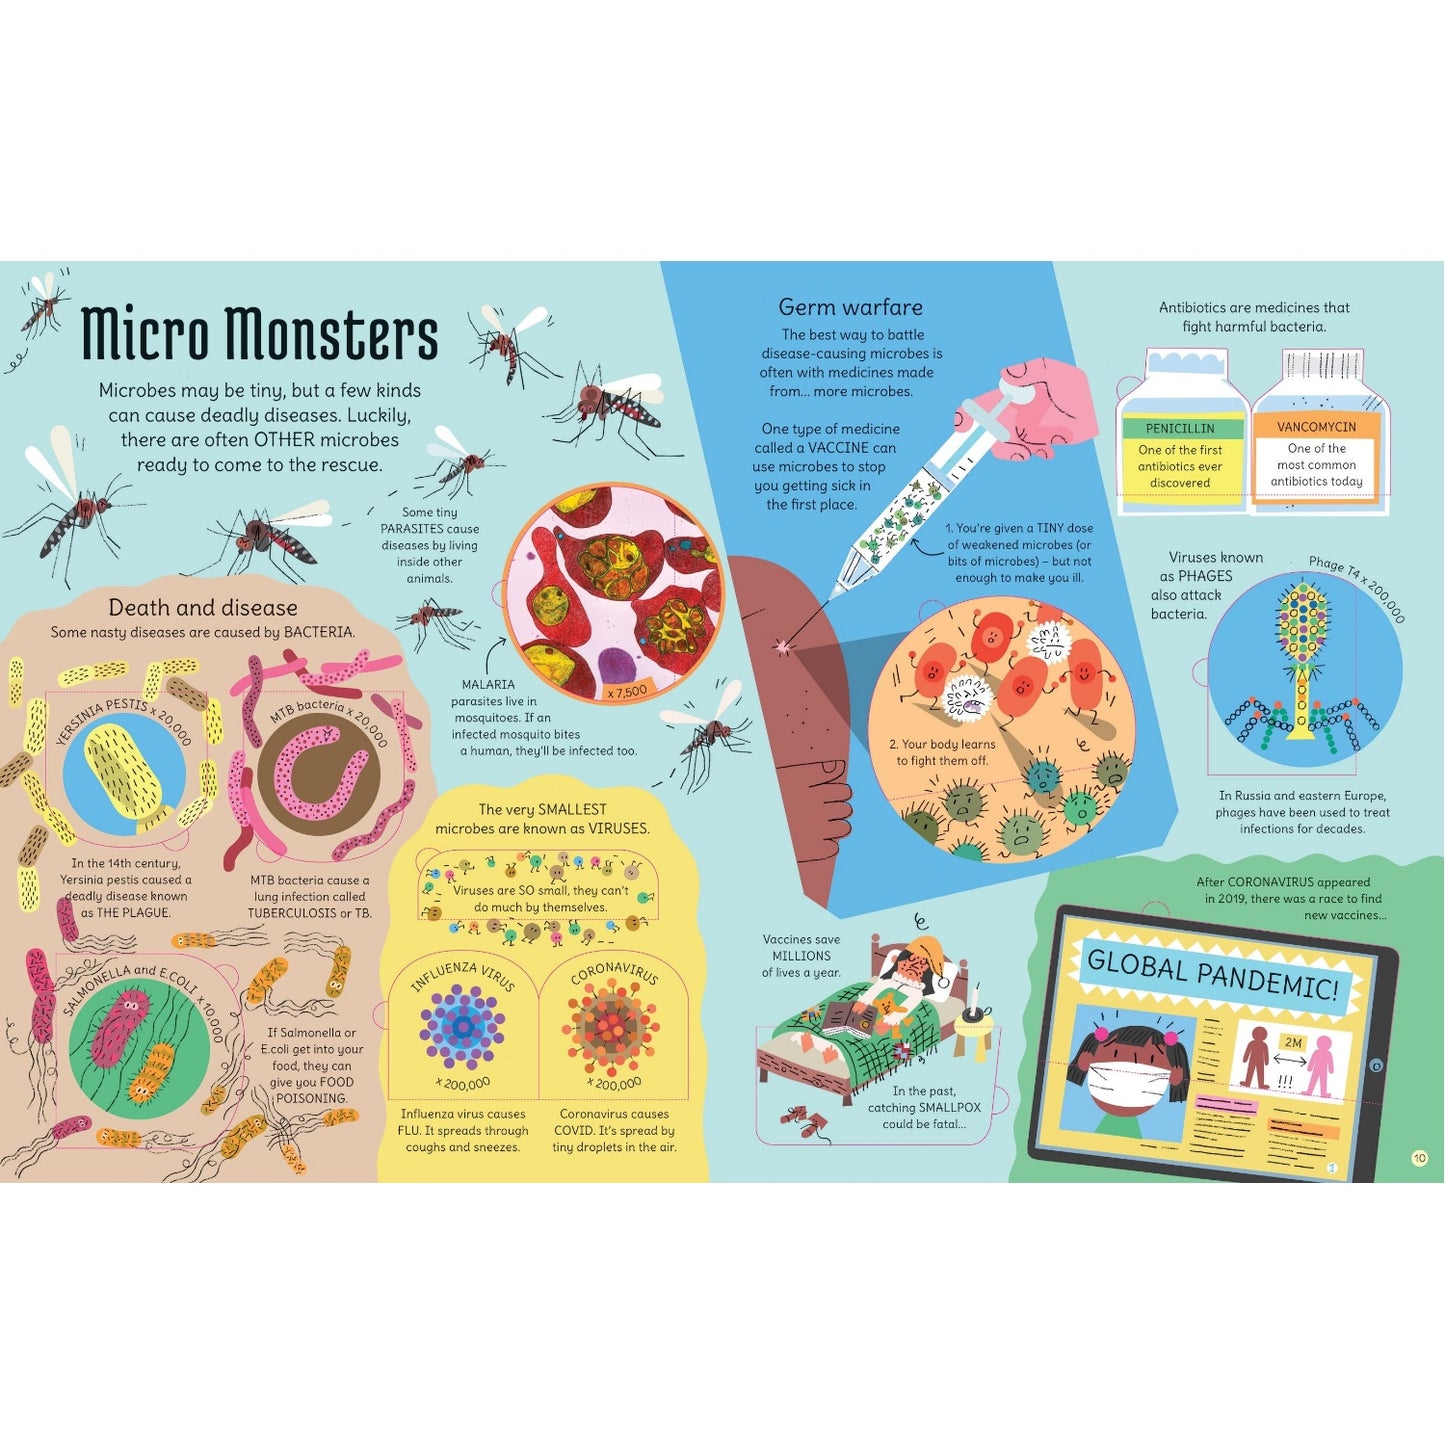 See Inside Microscopic World | Hardcover | Children's Book on Nature